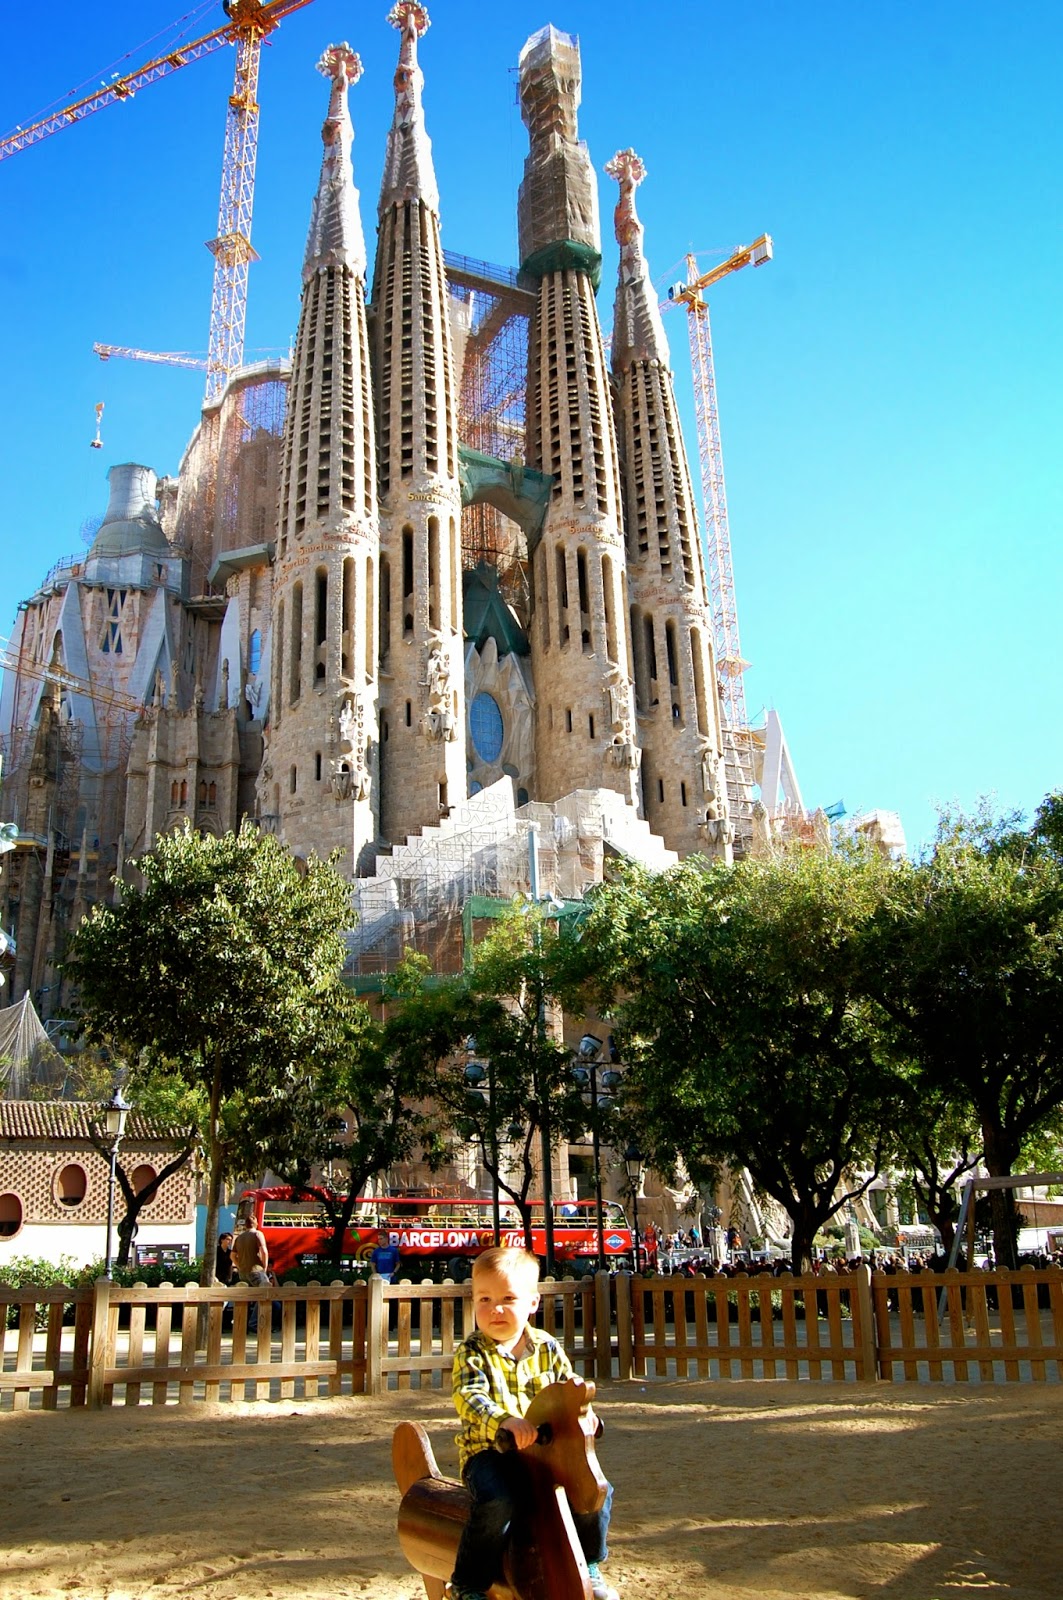 Another view of the Passion Facade on the Sagrada Família